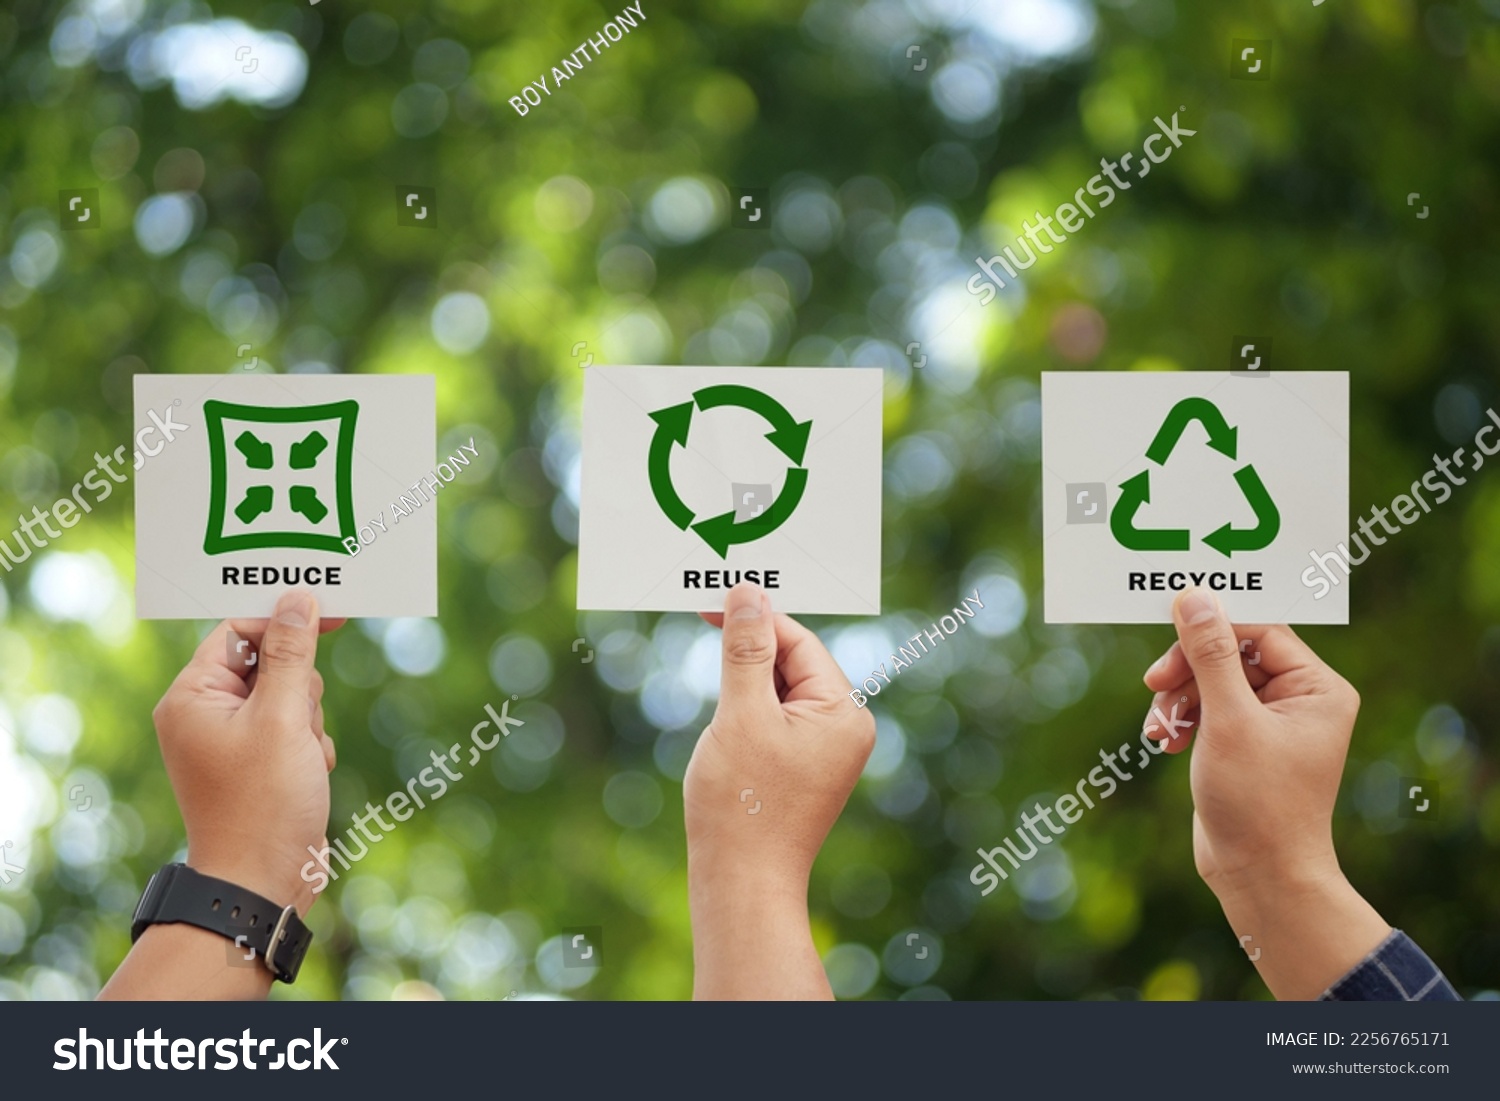 Hand holding reduce, reuse, recycle symbol on green bokeh background. Ecological and save the earth concept. An ecological metaphor for ecological waste management and a sustainable. #2256765171